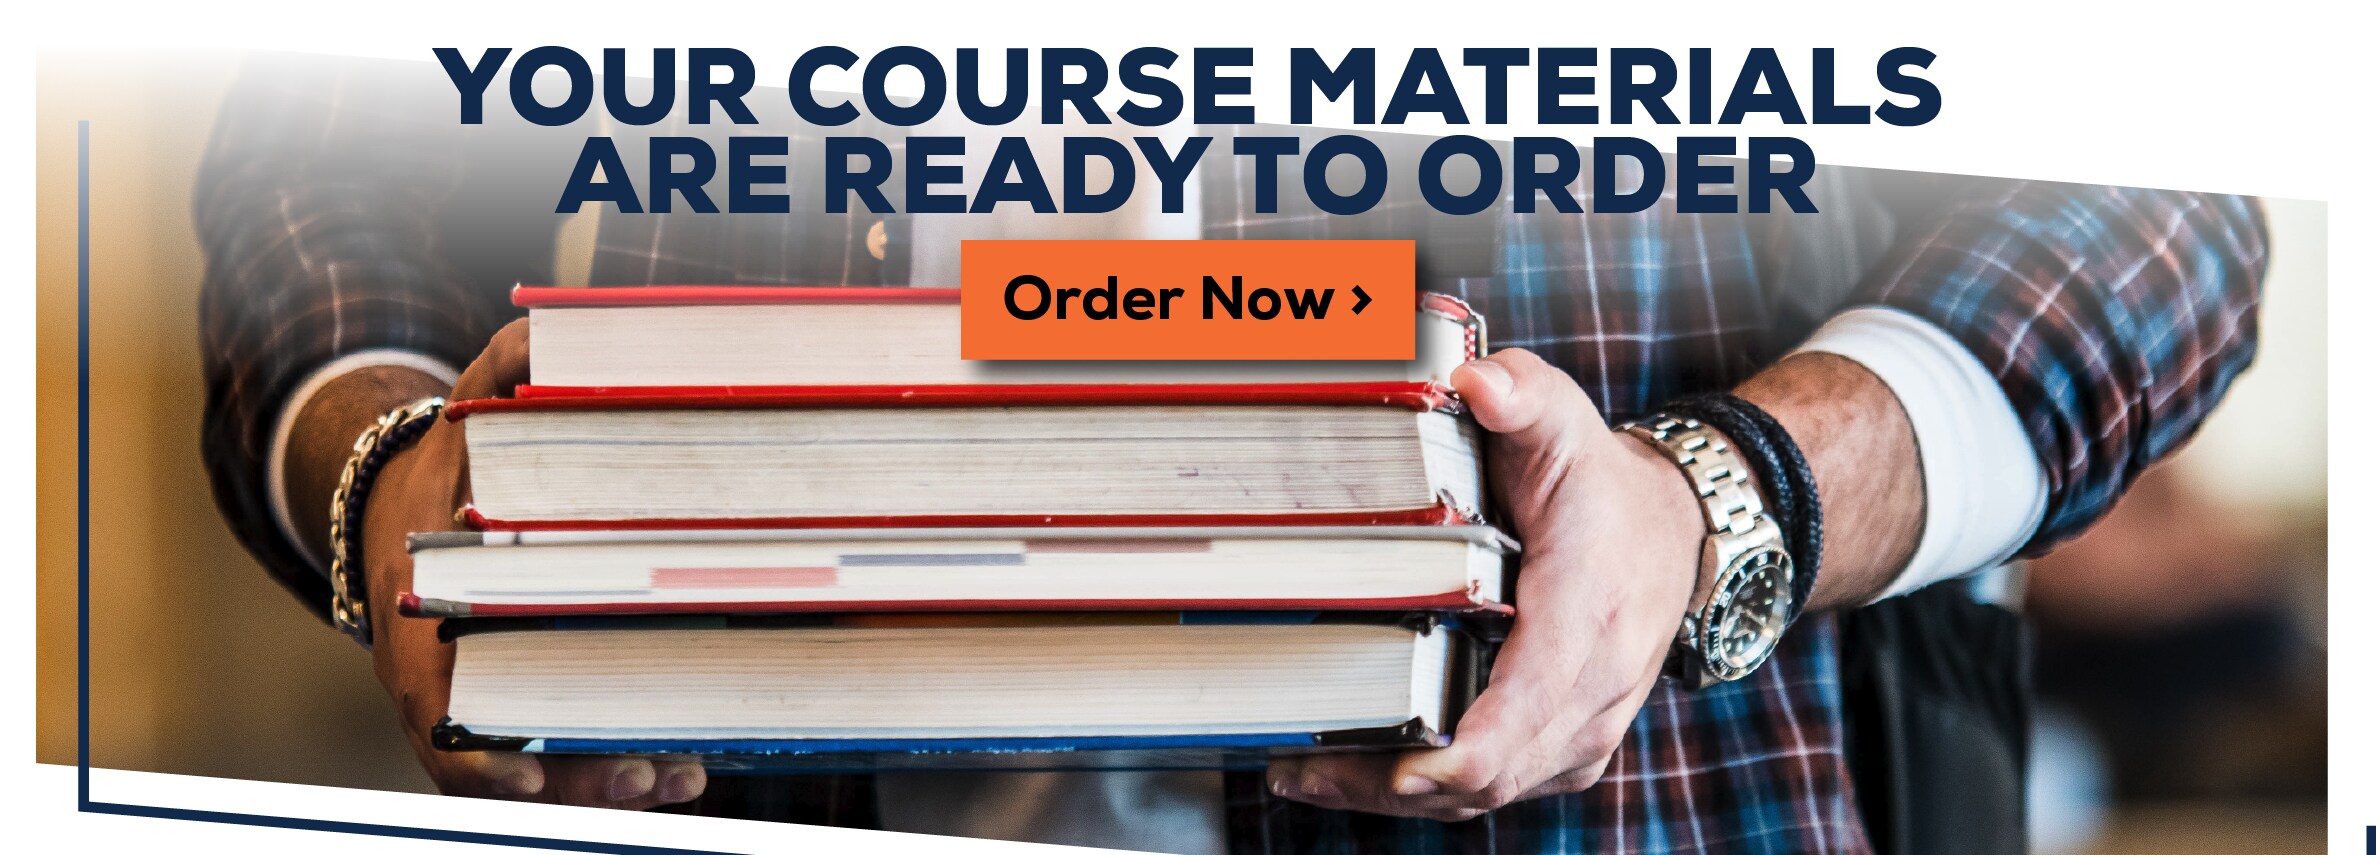 Your Course Materials are Ready to Order. Order Now. *Excludes marketplace purchases.